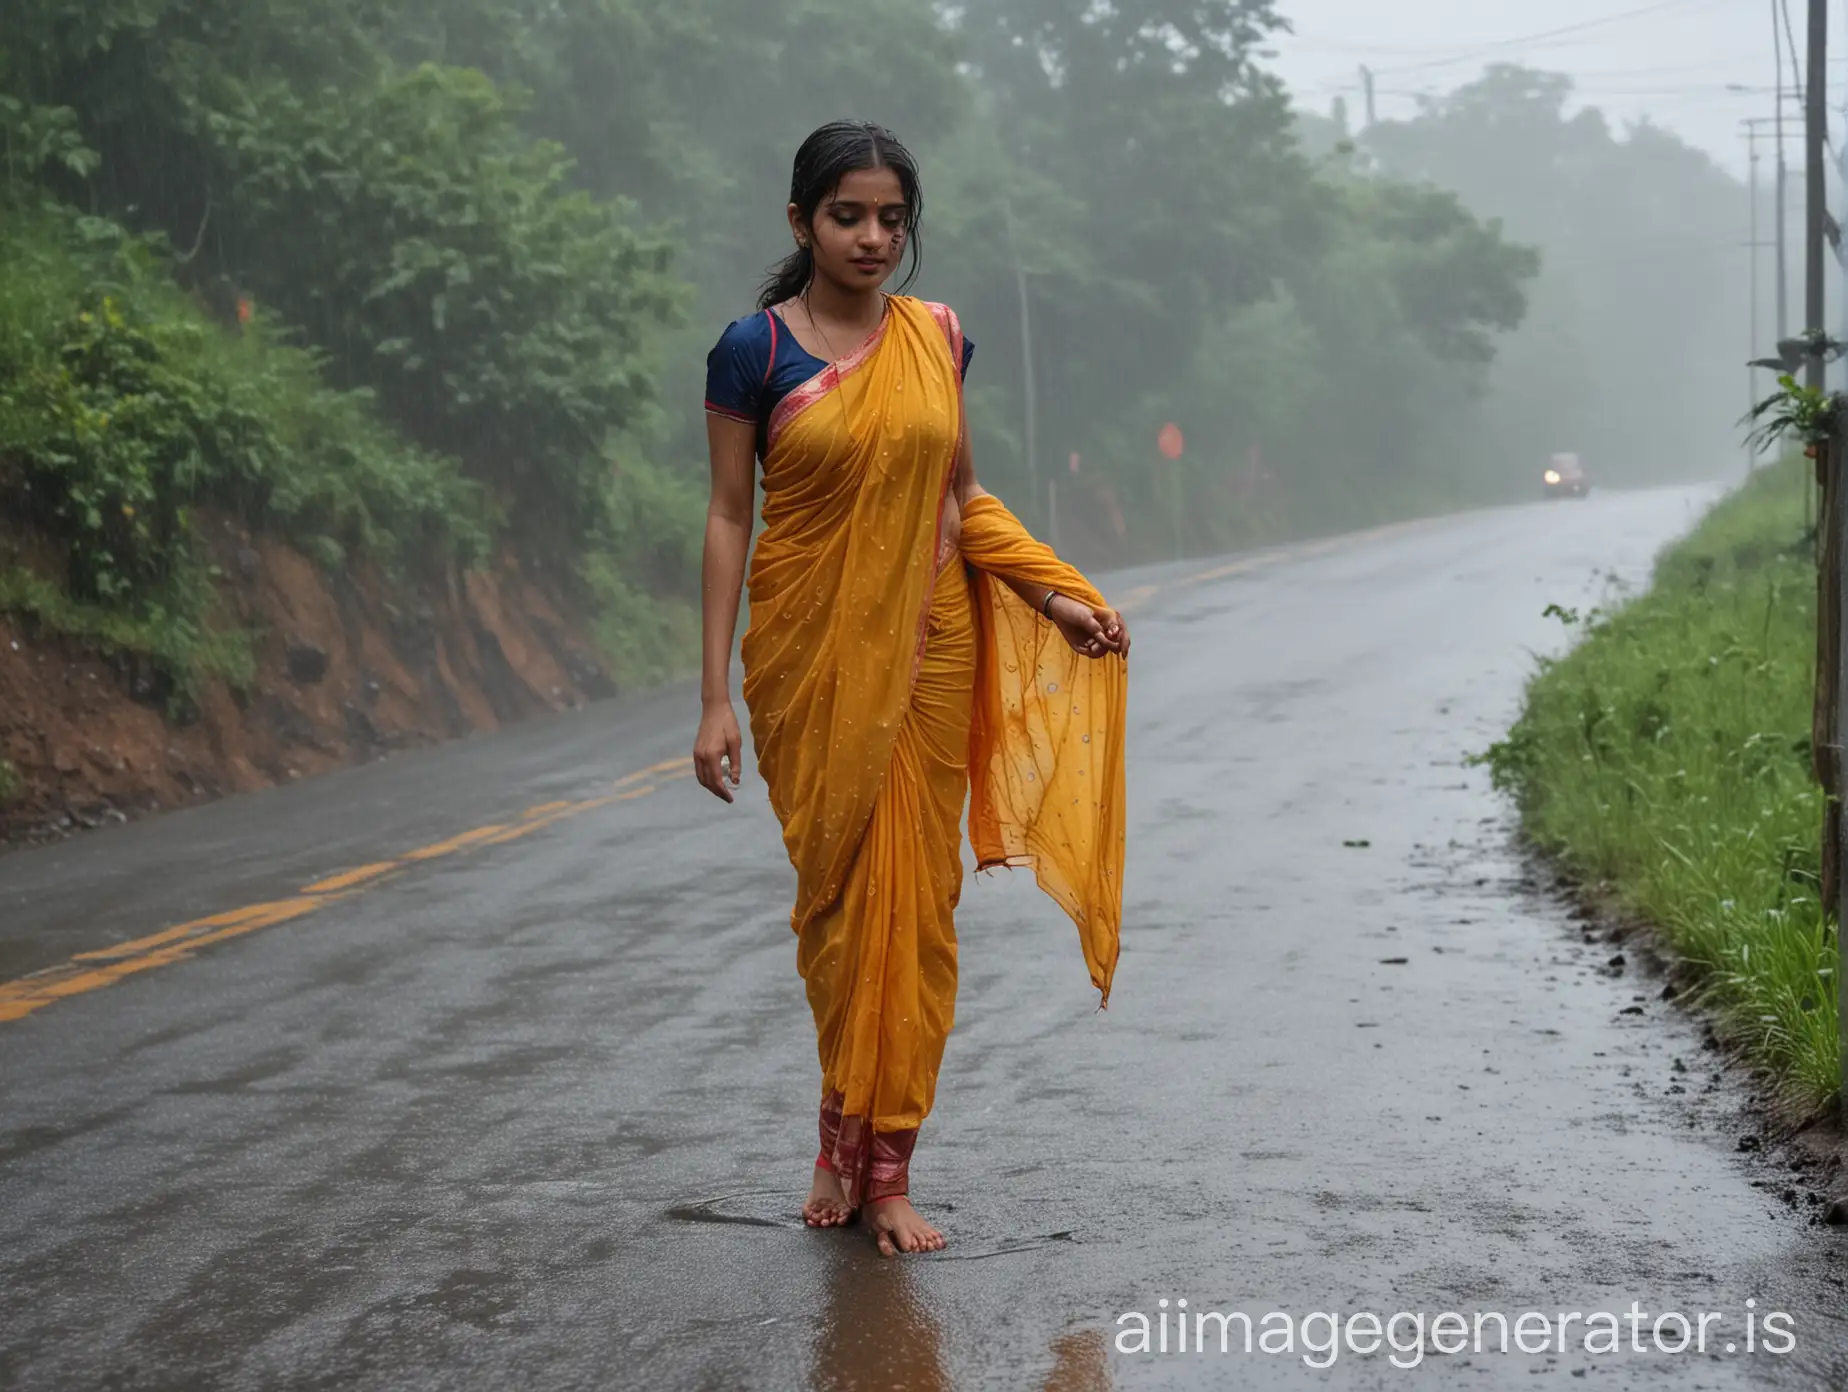 Rainy-Hill-Station-Road-Serene-Scene-of-a-Girl-in-a-Wet-Saree